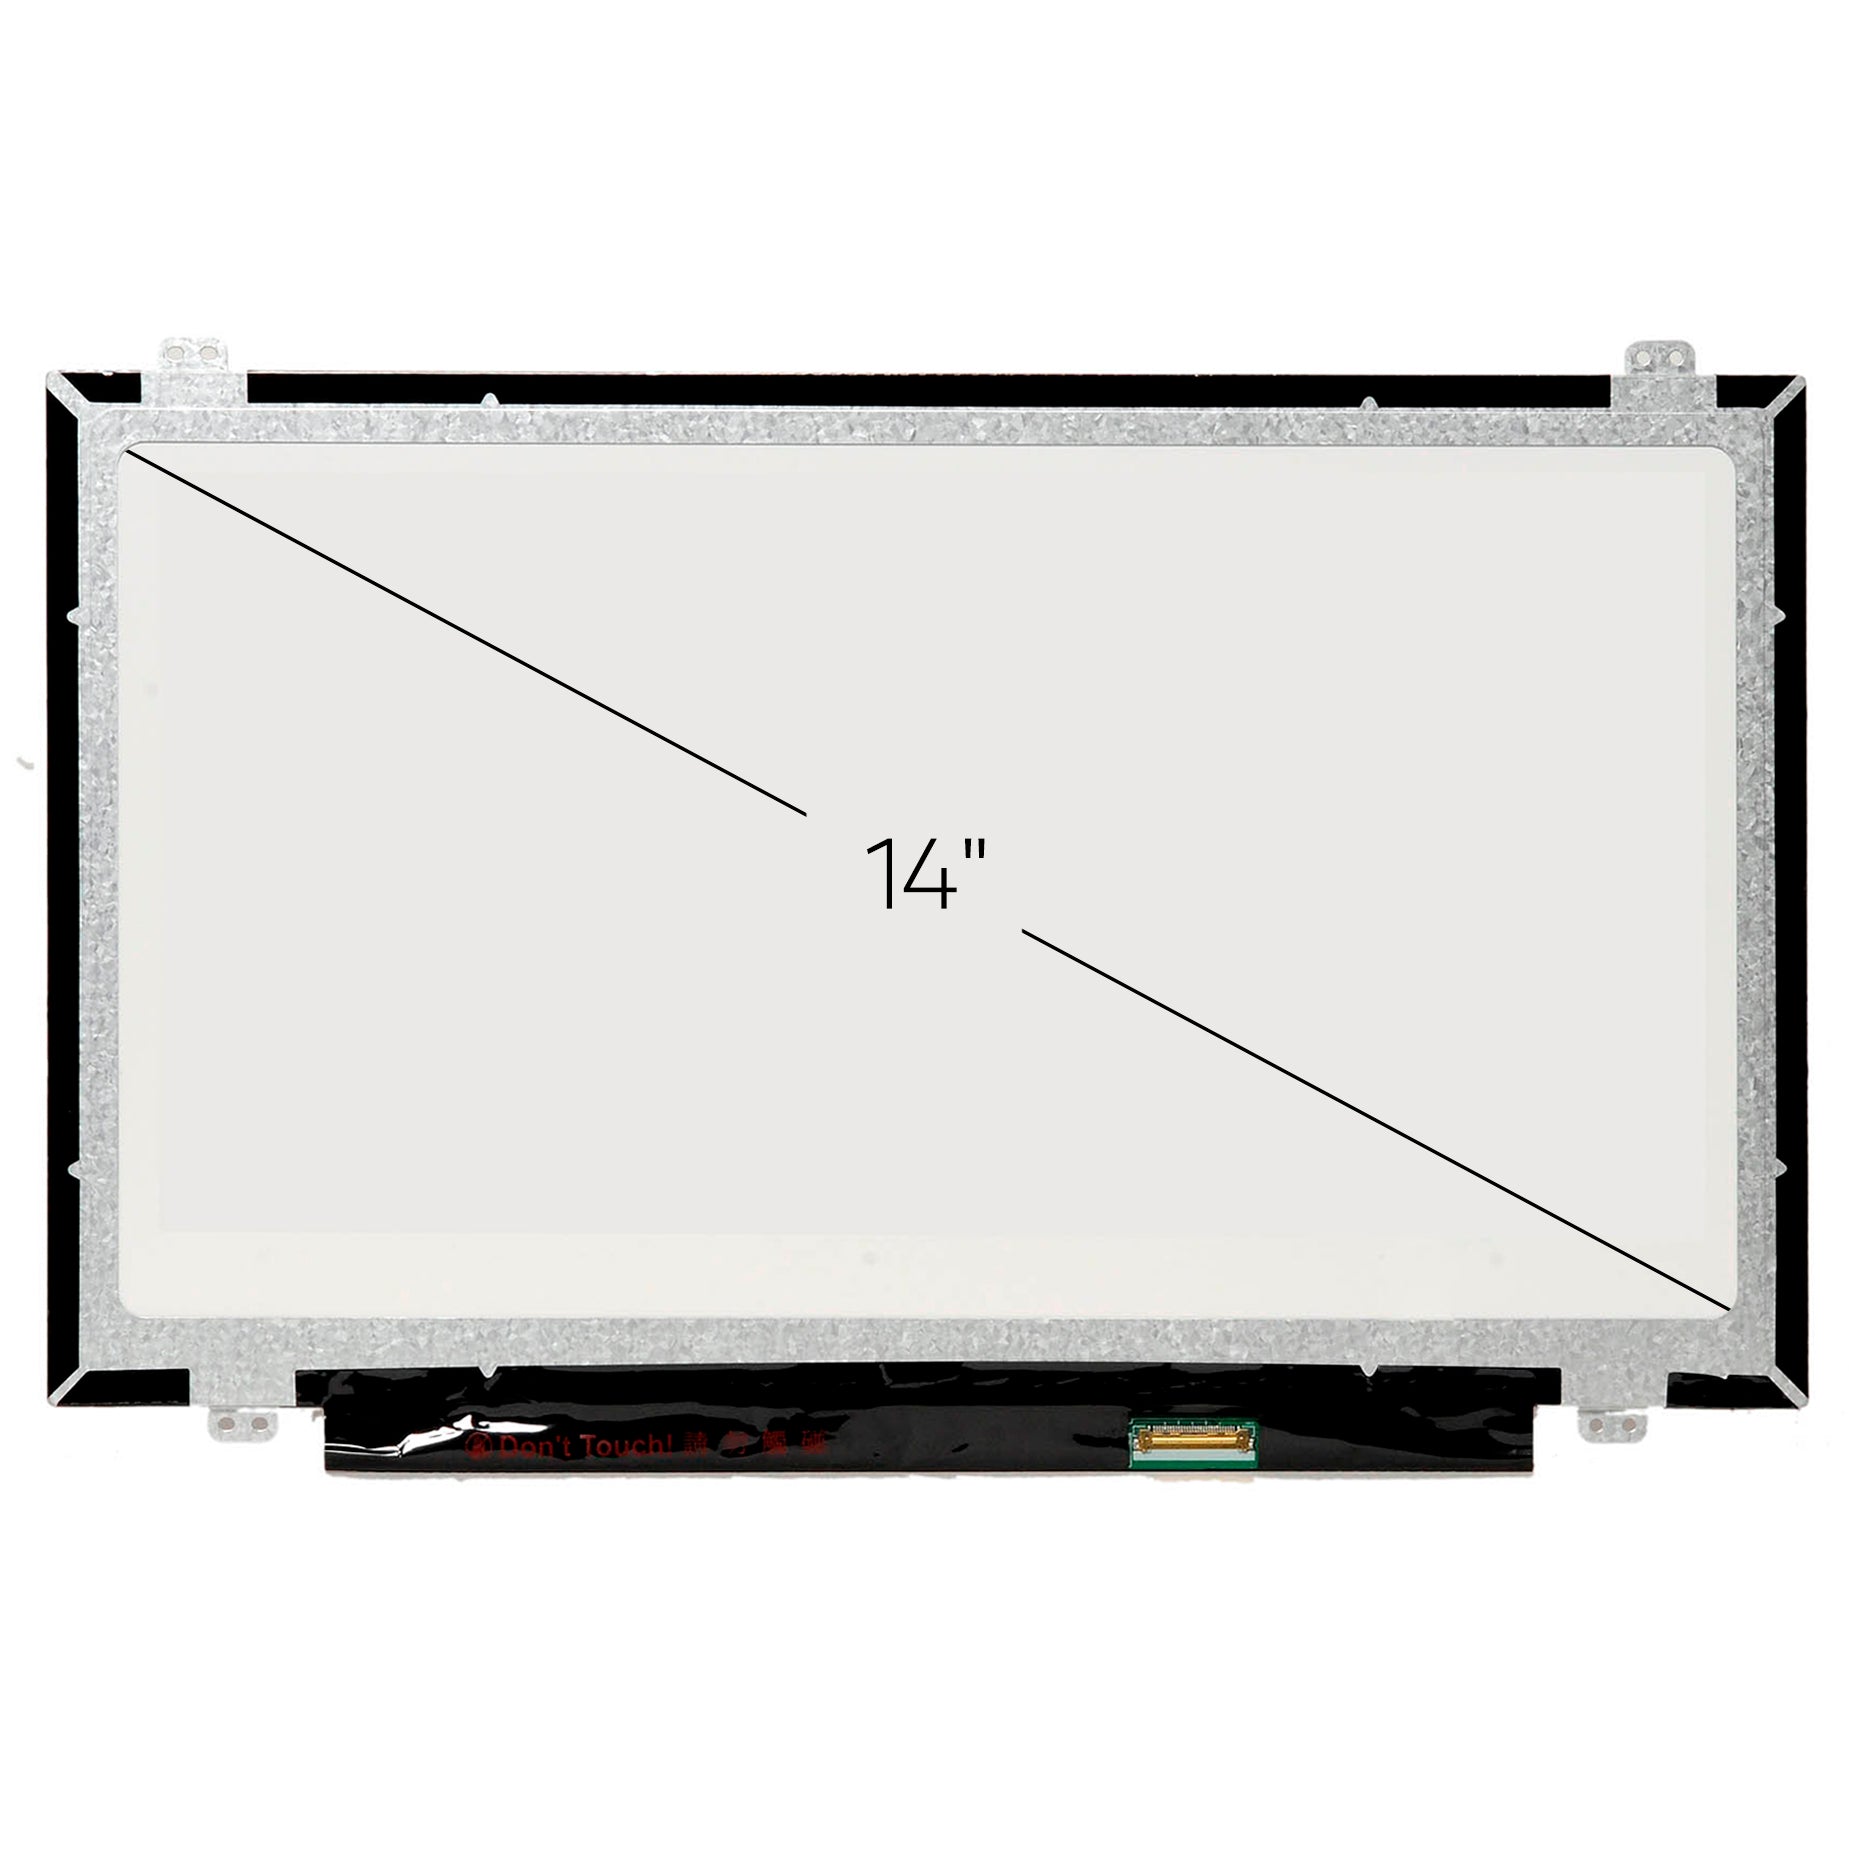 Screen Replacement for NT140WHM-N31 V8.0 HD 1366x768 Glossy LCD LED Display